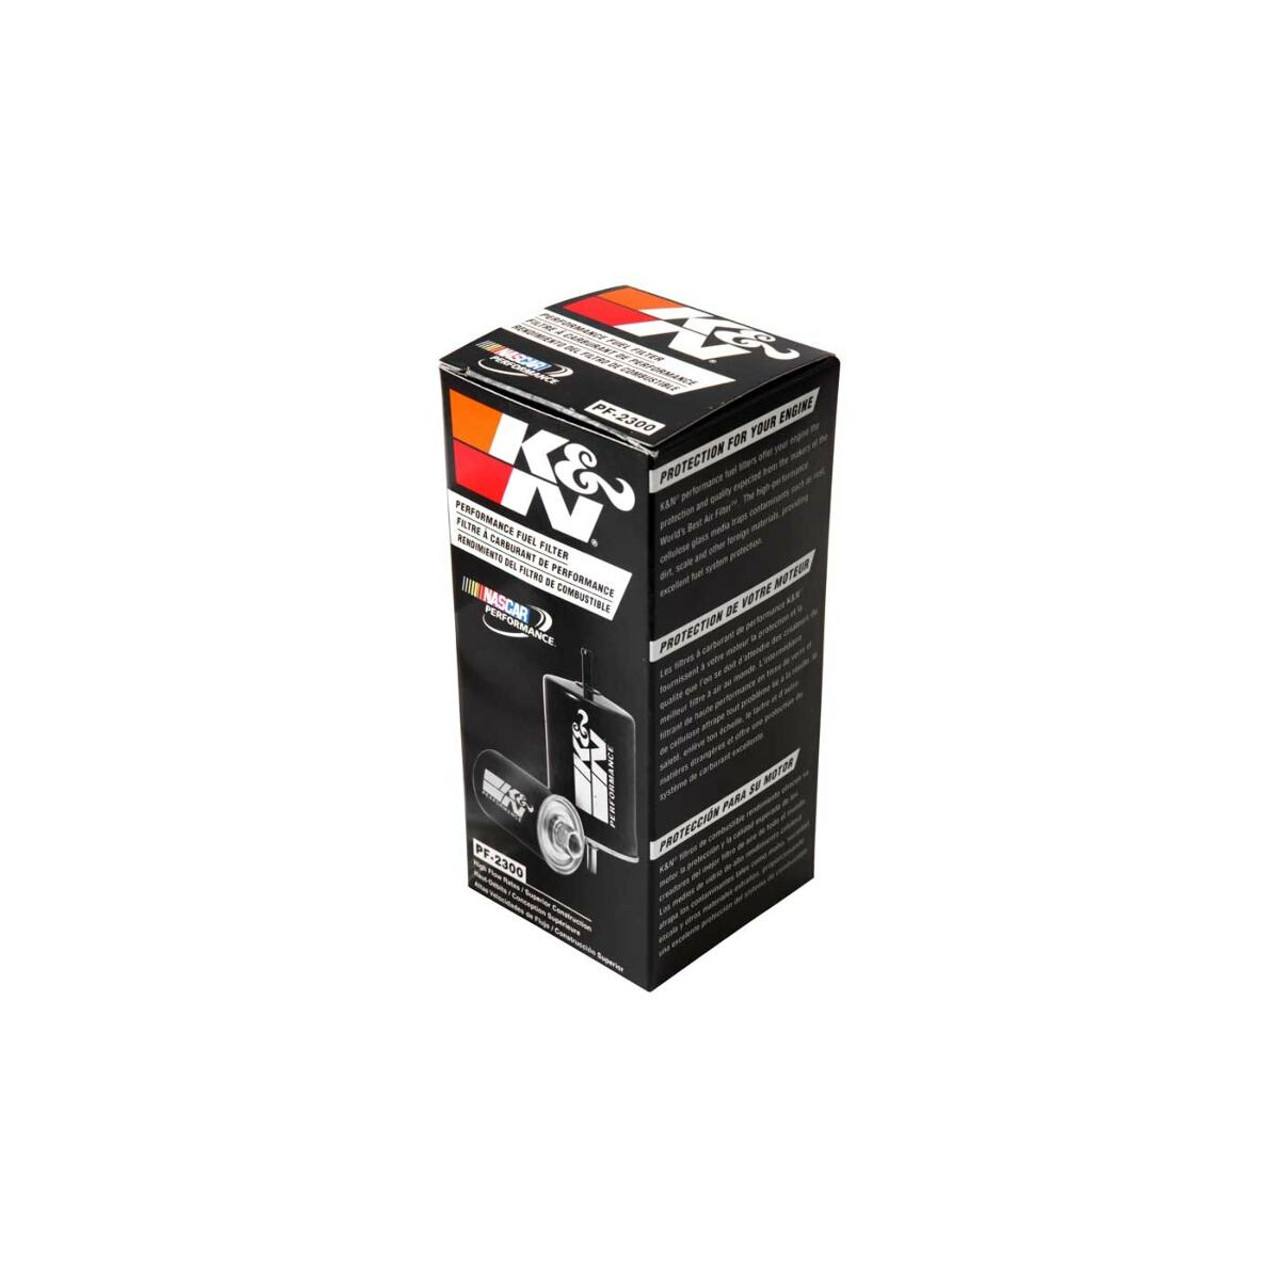 K&N Filters PF-2300 In-Line Gas Filter Fuel Filter